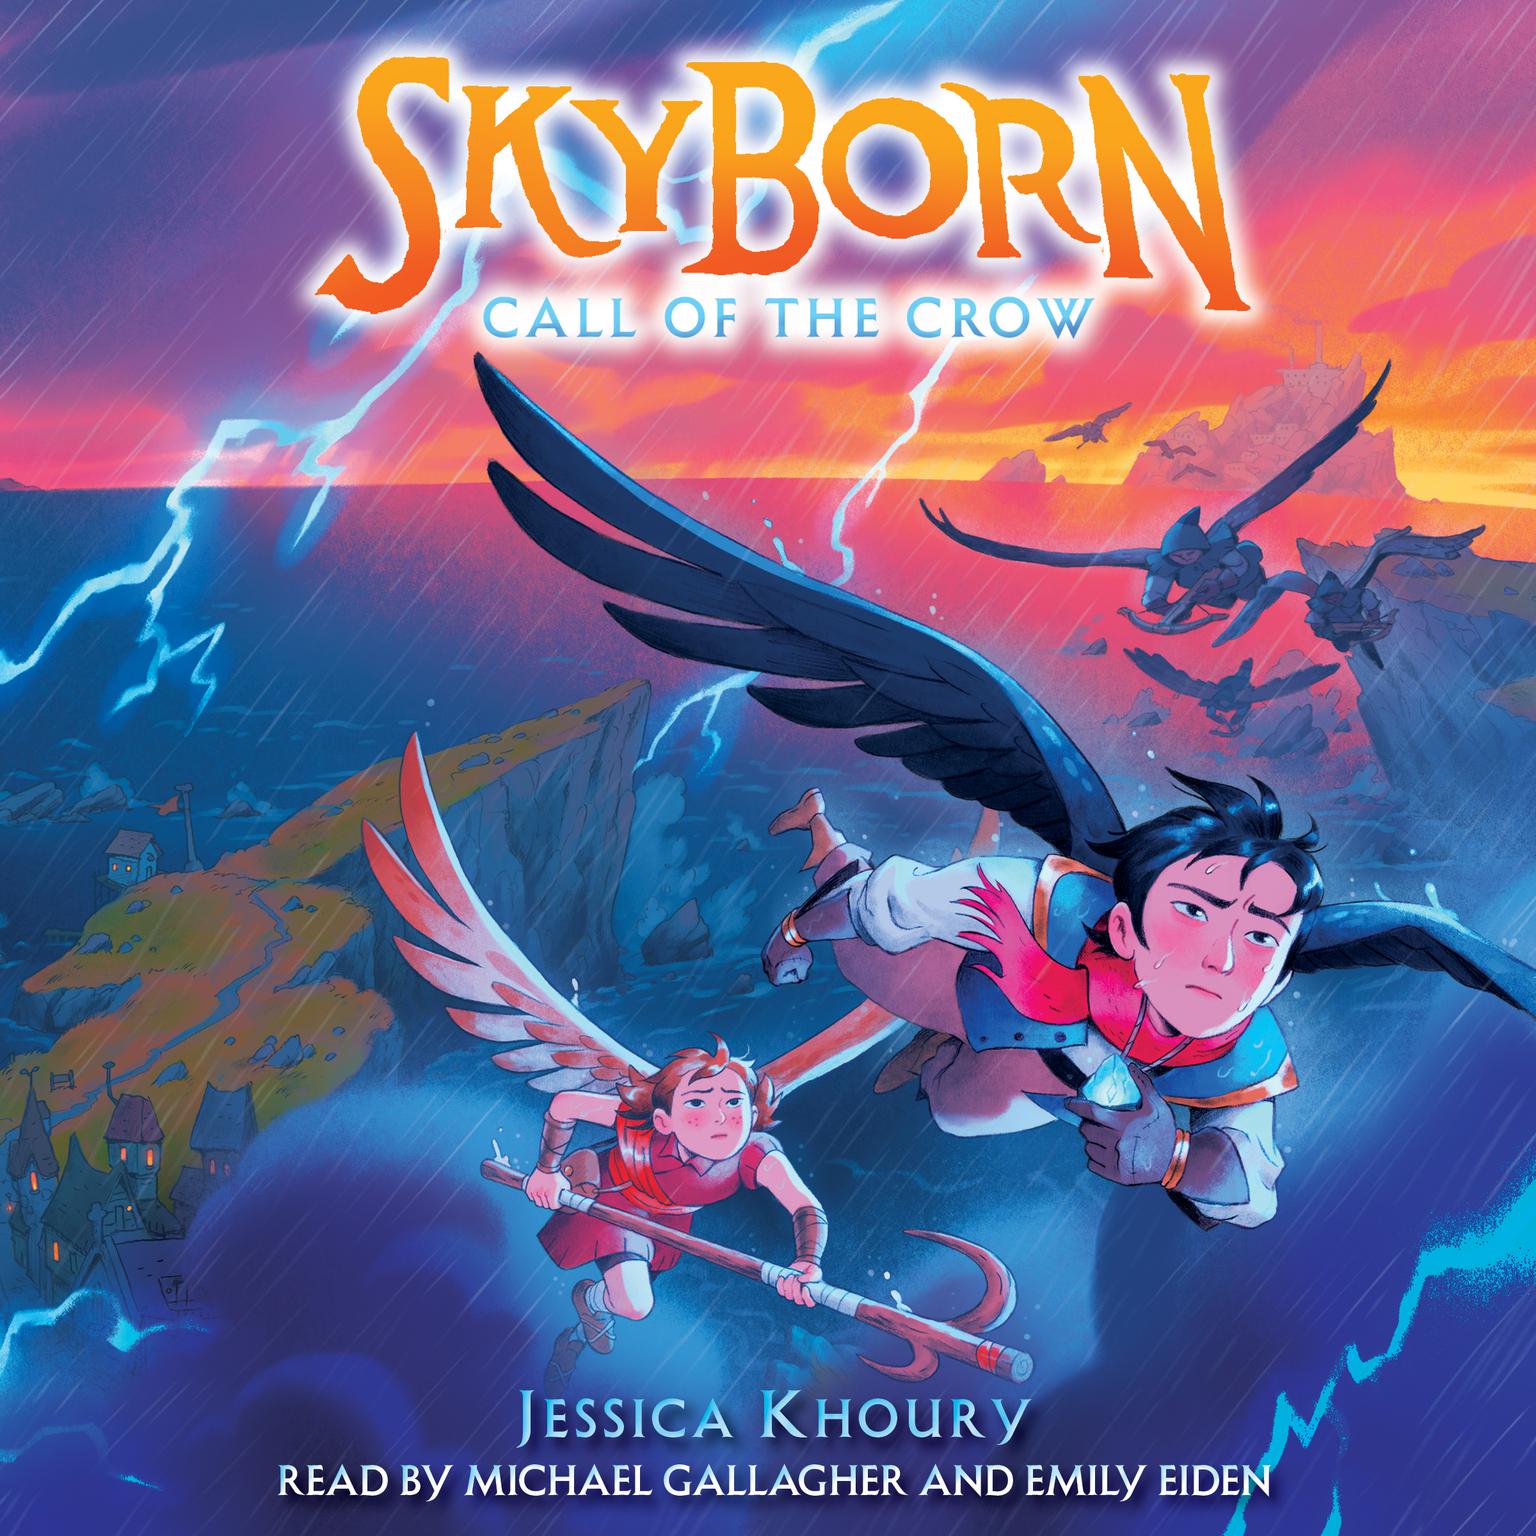 Call of the Crow (Skyborn #2) Audiobook, by Jessica Khoury